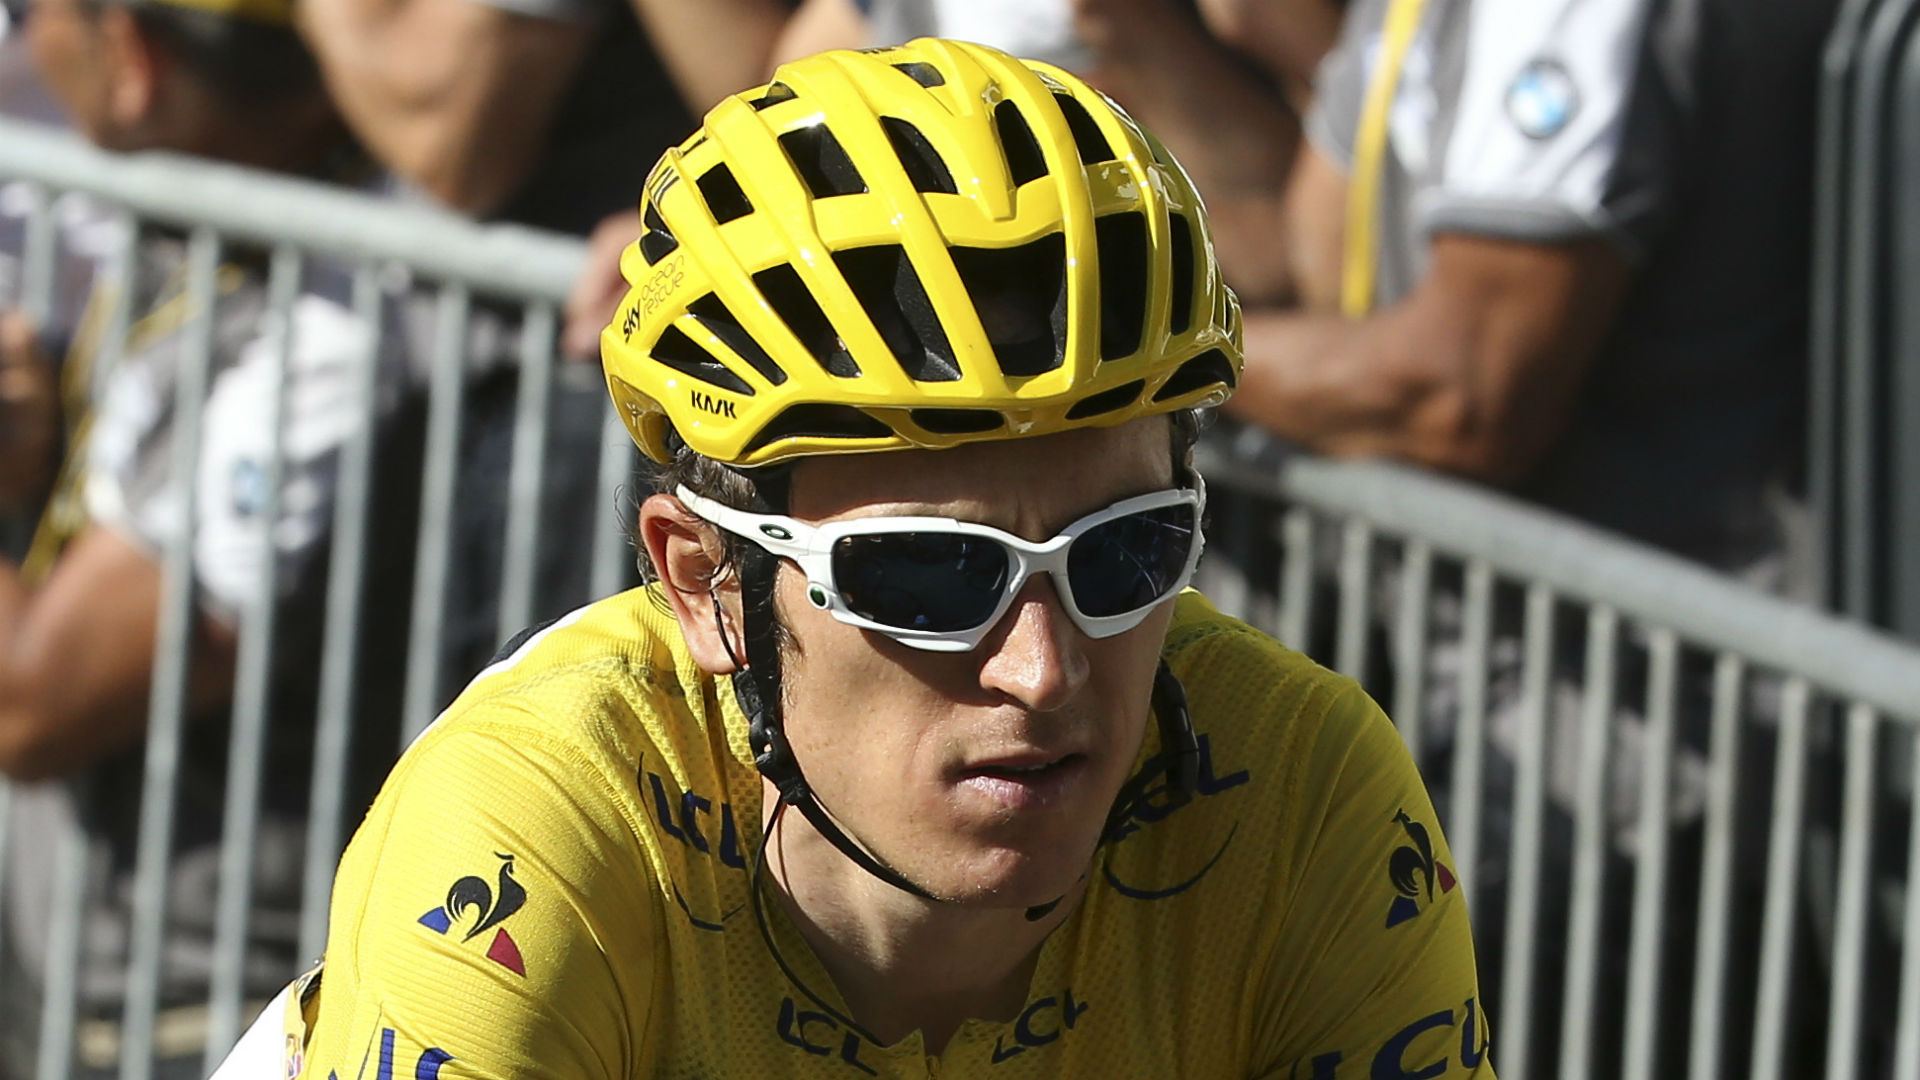 Geraint Thomas has appealed for whoever stole the Tour de France trophy to have the "good grace" to return it.